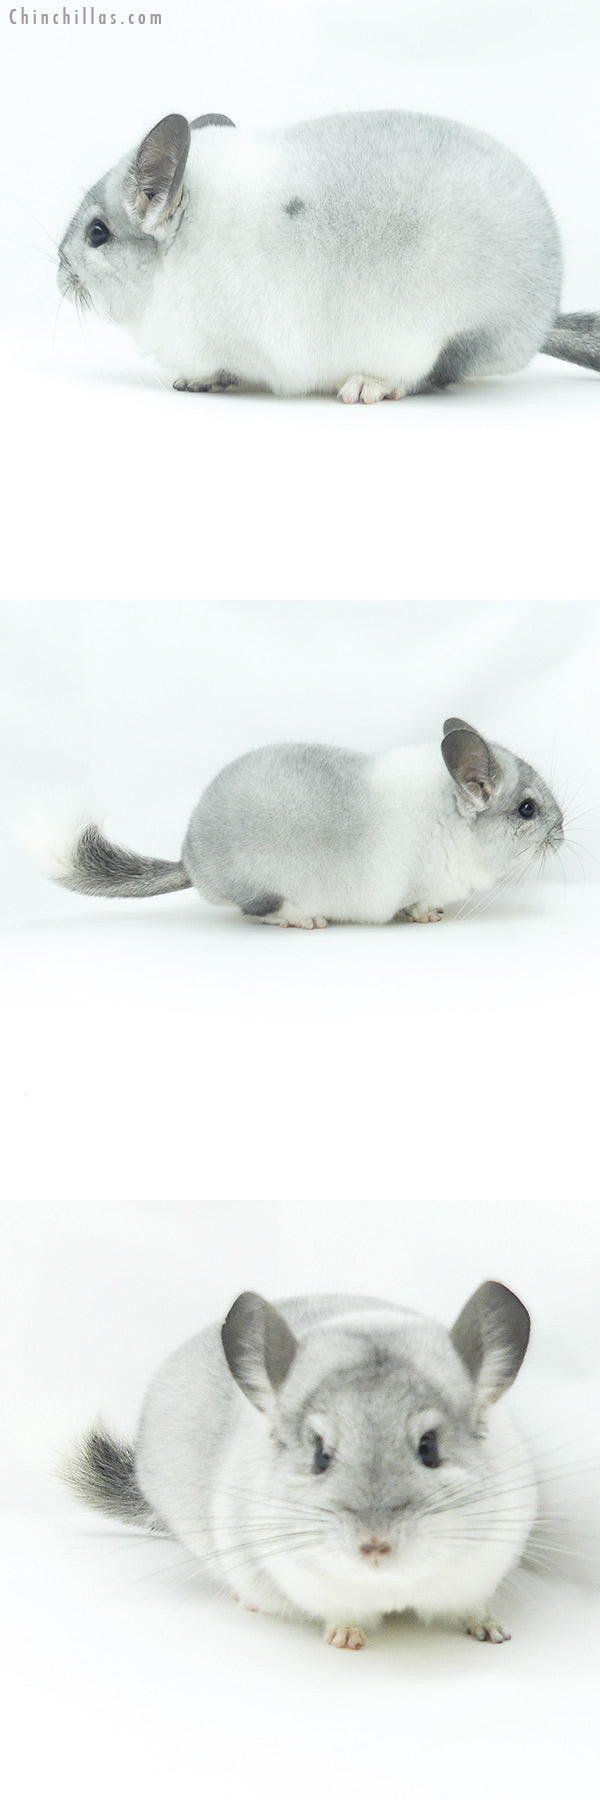 Chinchilla or related item offered for sale or export on Chinchillas.com - 20130 Blocky Herd Improvement Quality White Mosaic Male Chinchilla